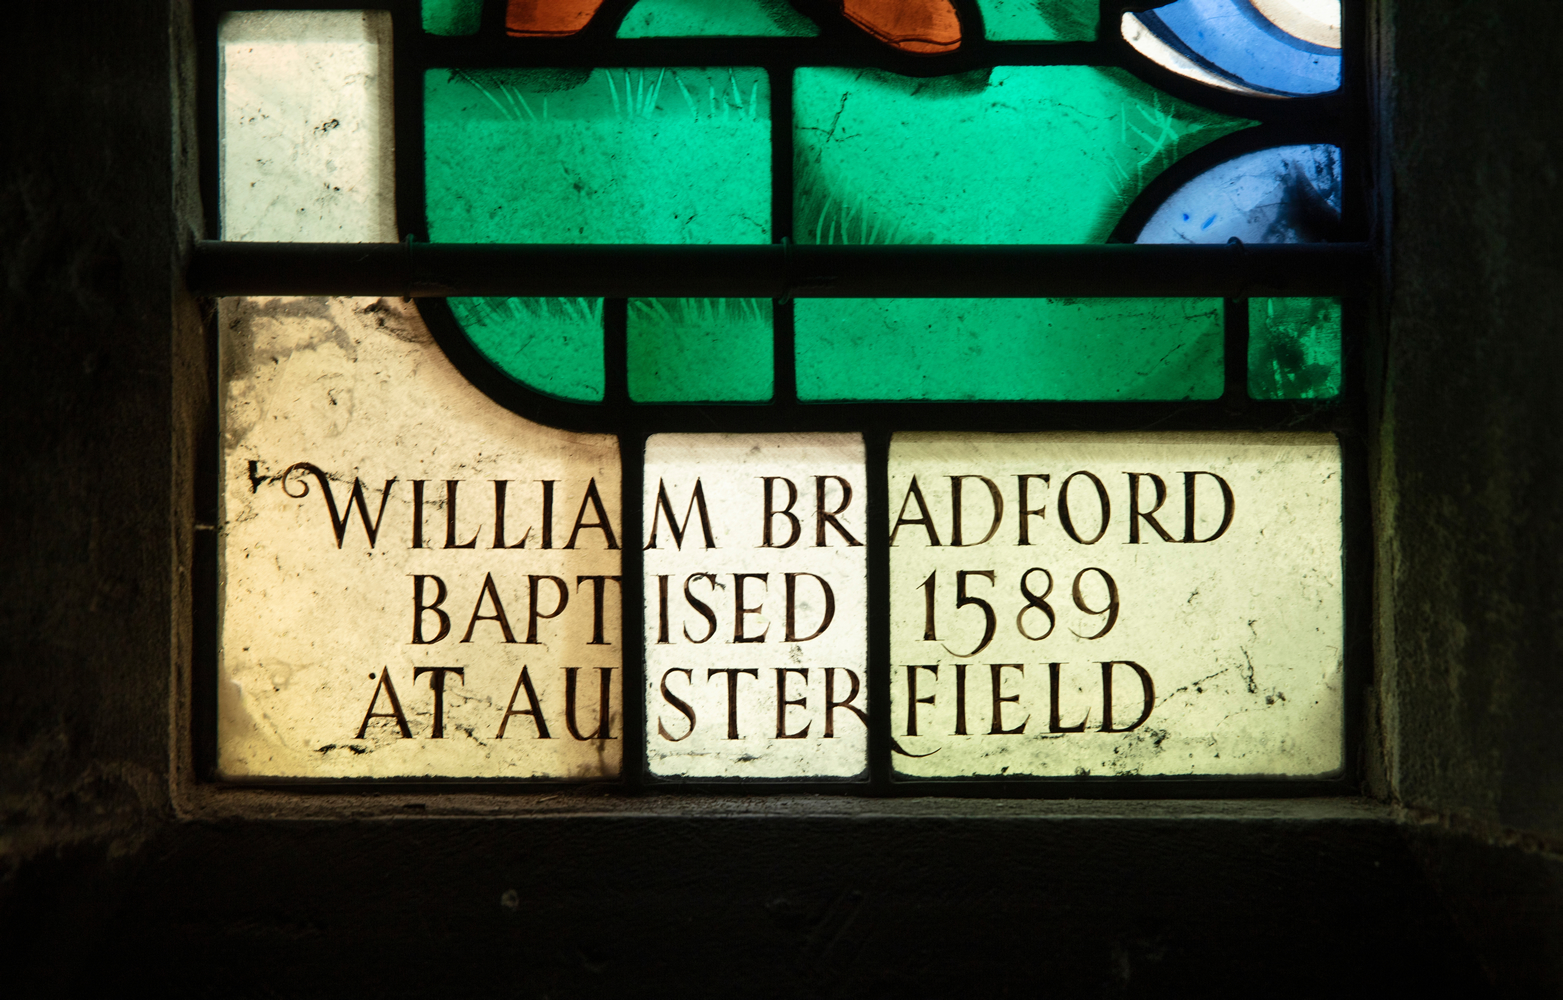 Image name william bradford baptised austerfield yorkshire the 1 image from the post As President Biden visits UK, learn about Yorkshire's links to the USA's formation in Yorkshire.com.